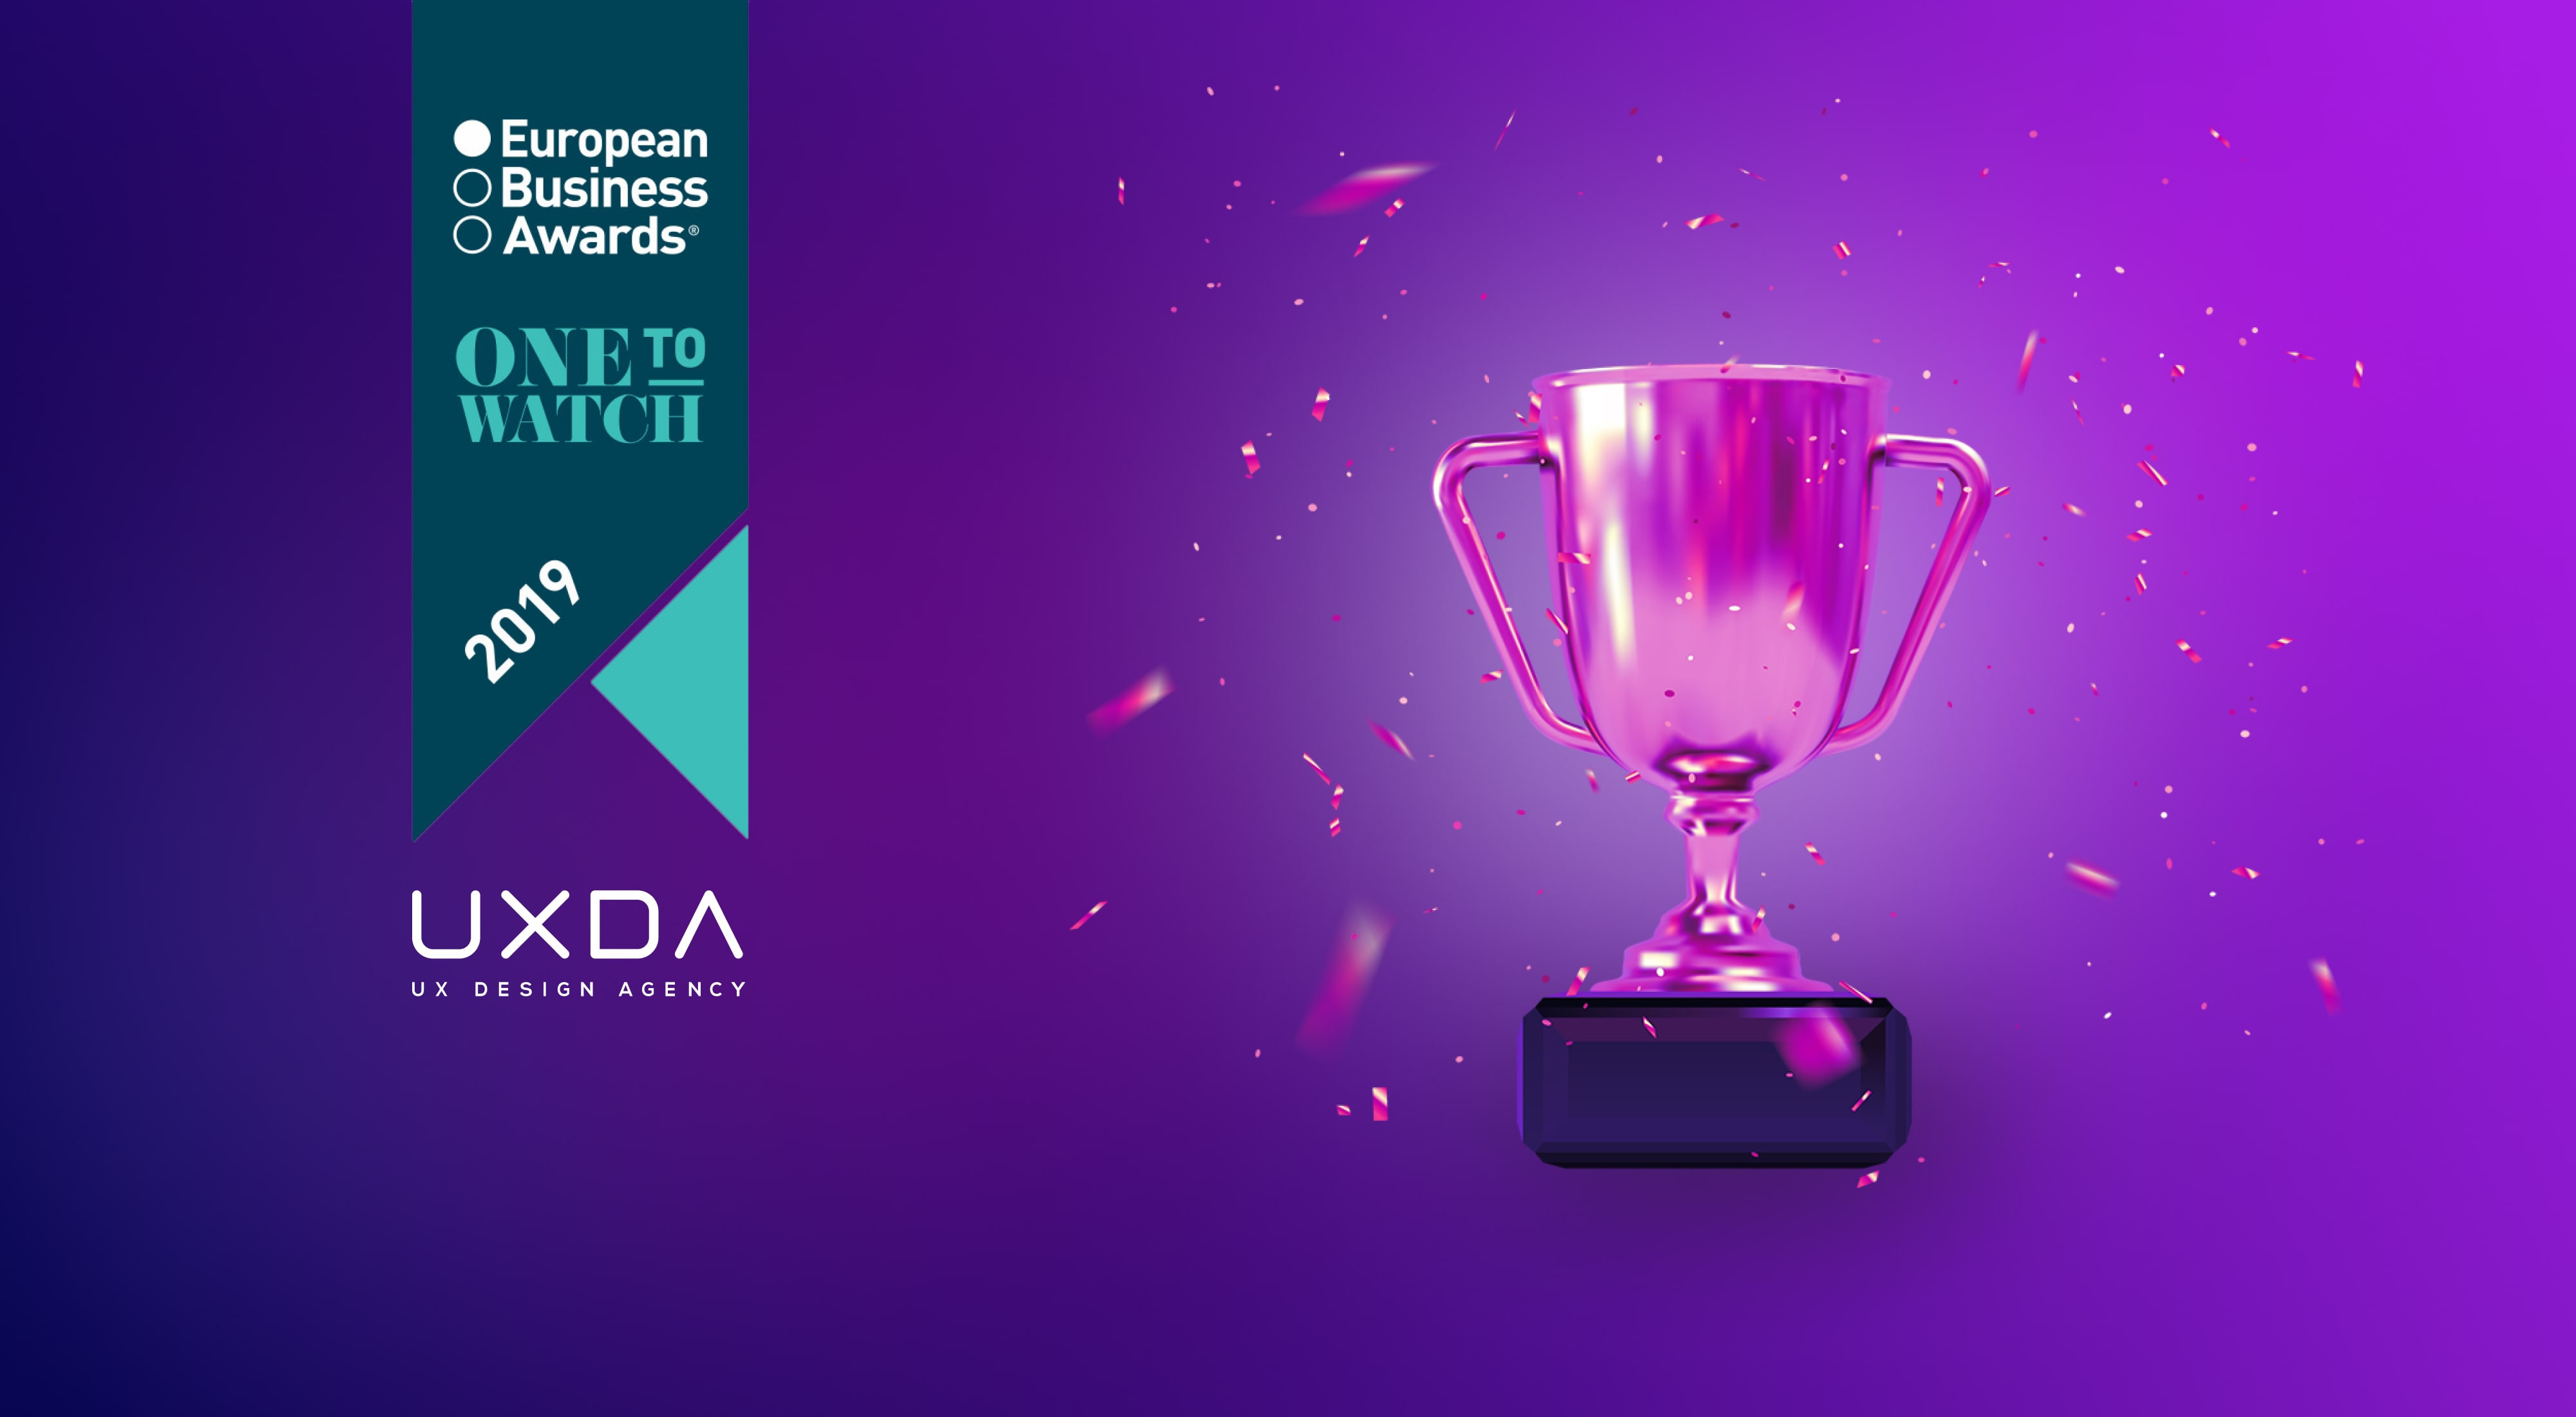 UXDA Amongst The Best Companies In The European Business Awards